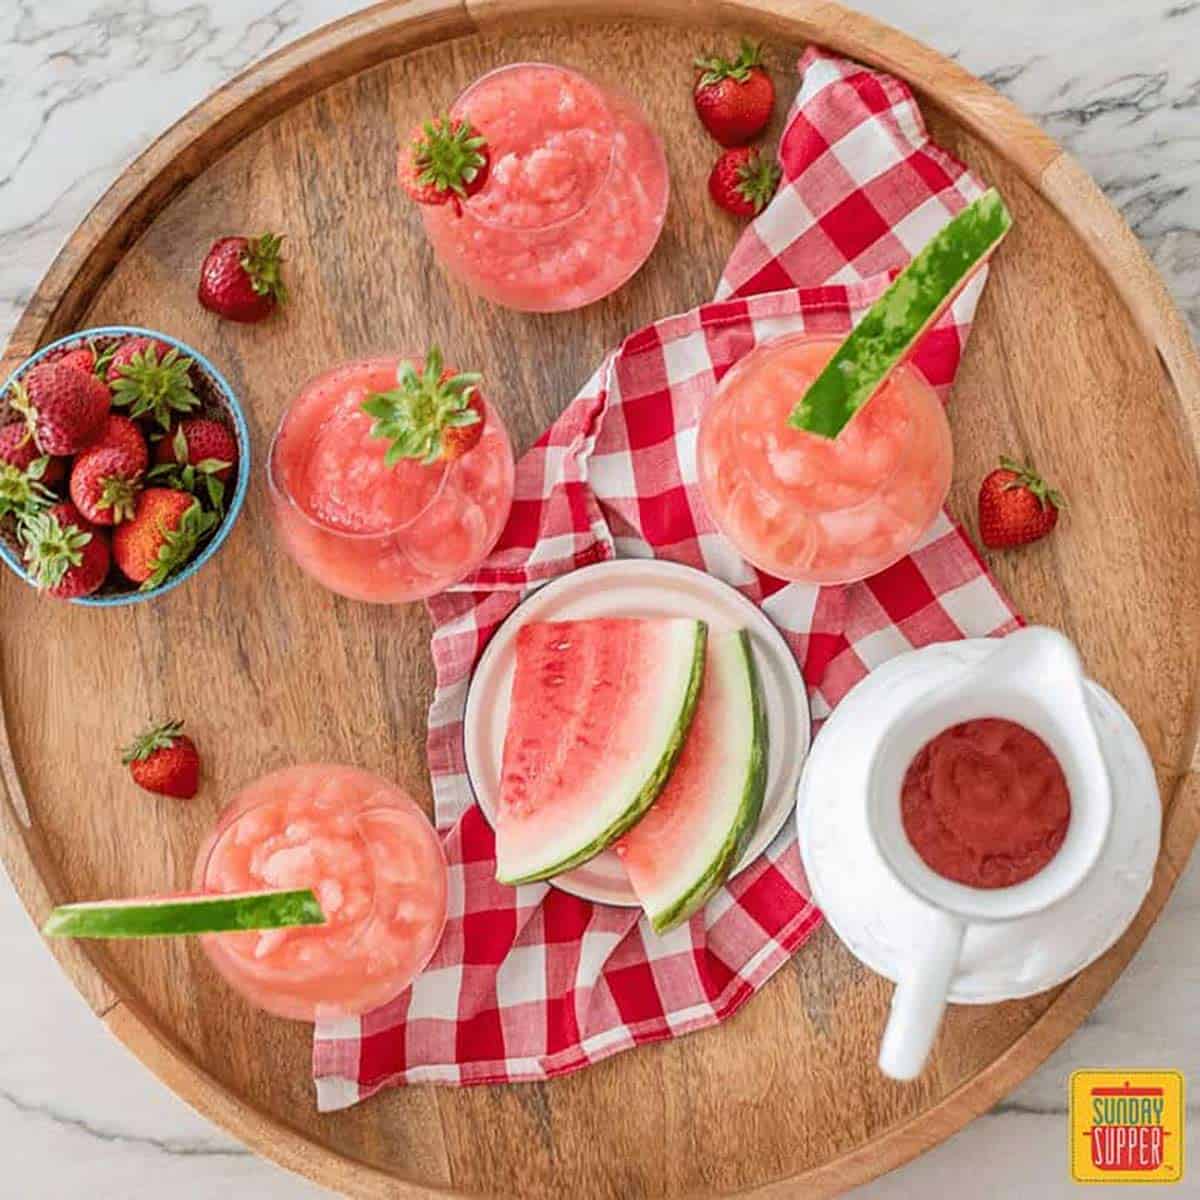 Wooden platter with froze cocktails in glasses and fresh strawberries and watermelon slices